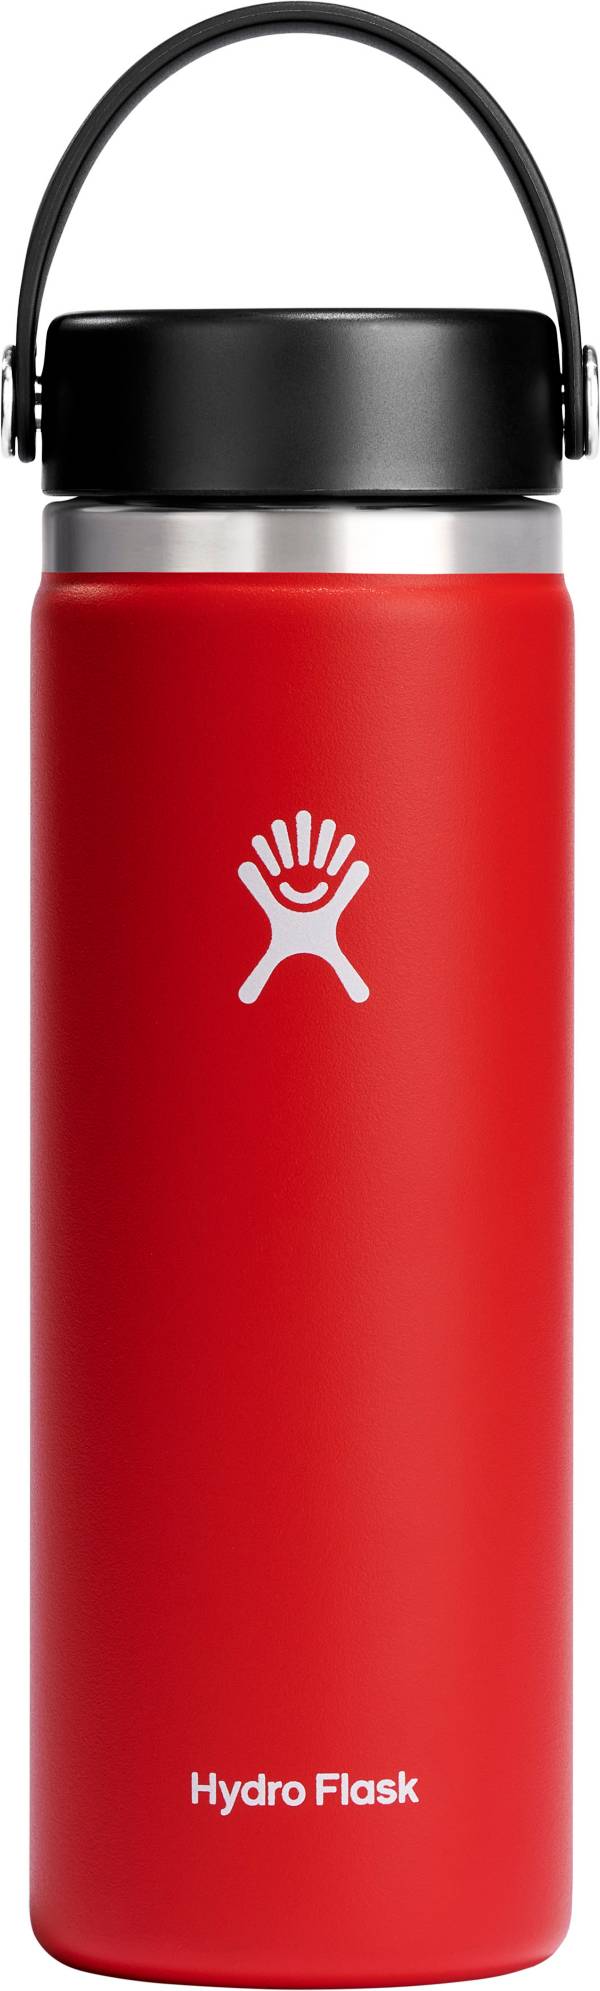 Hydro Flask Wide Mouth 20 oz. Bottle product image